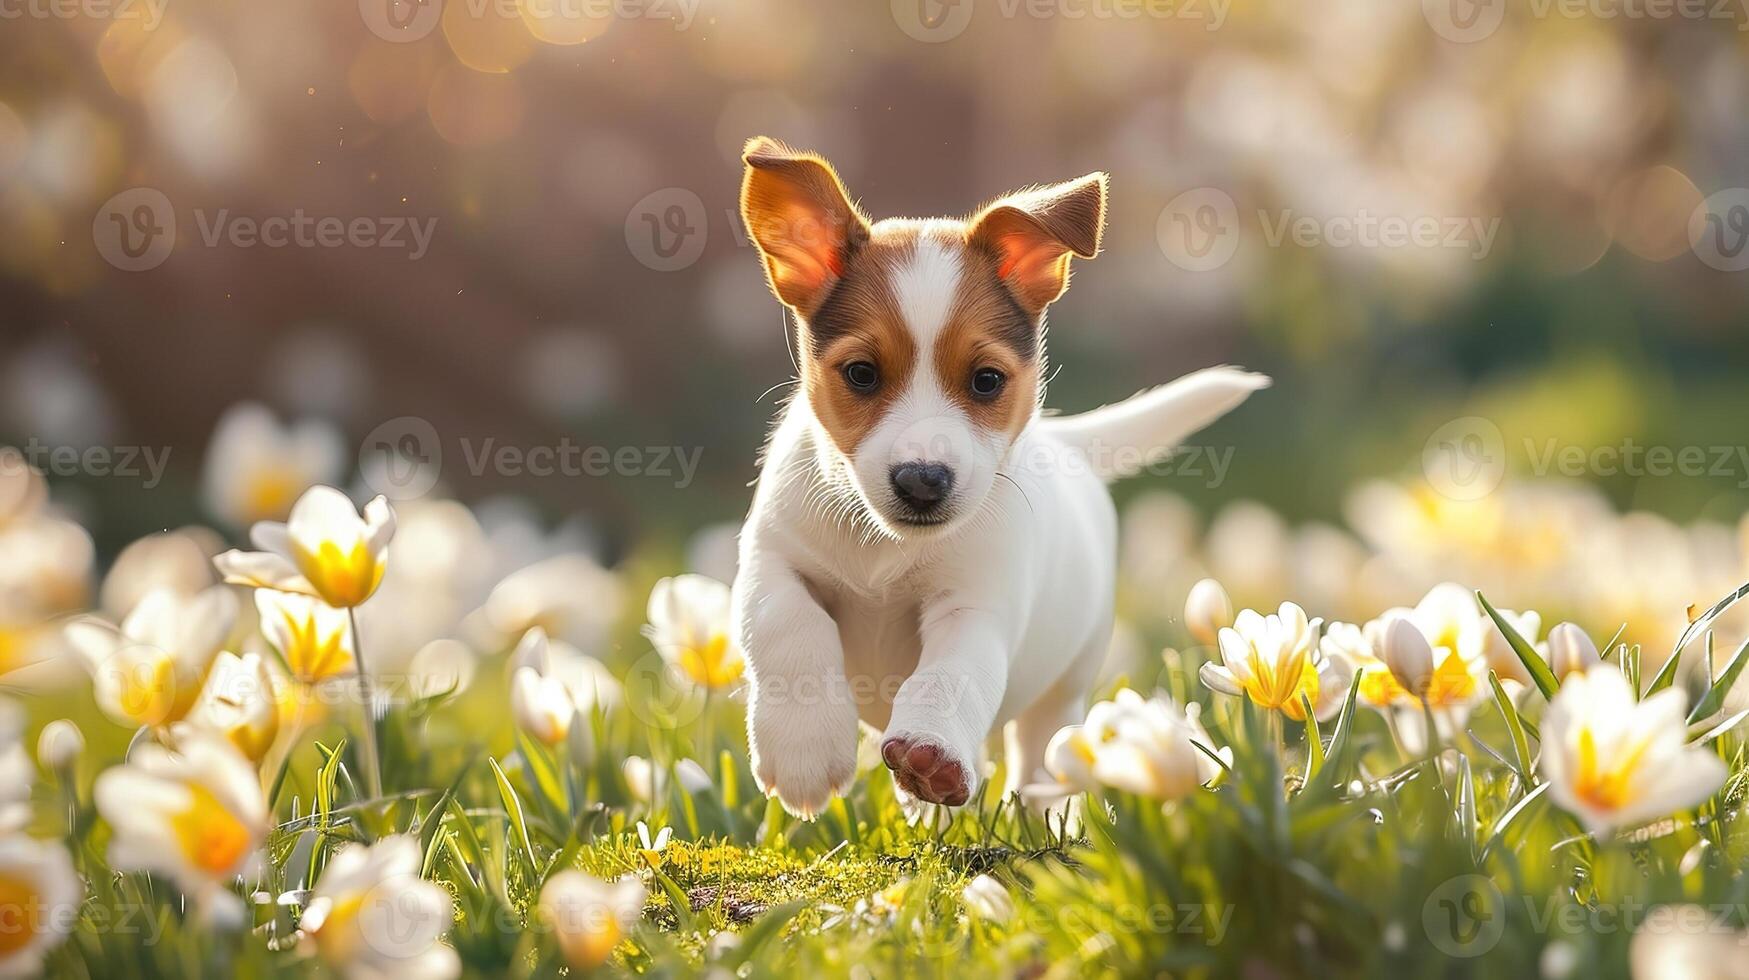 Puppy running across the field in flowers photo